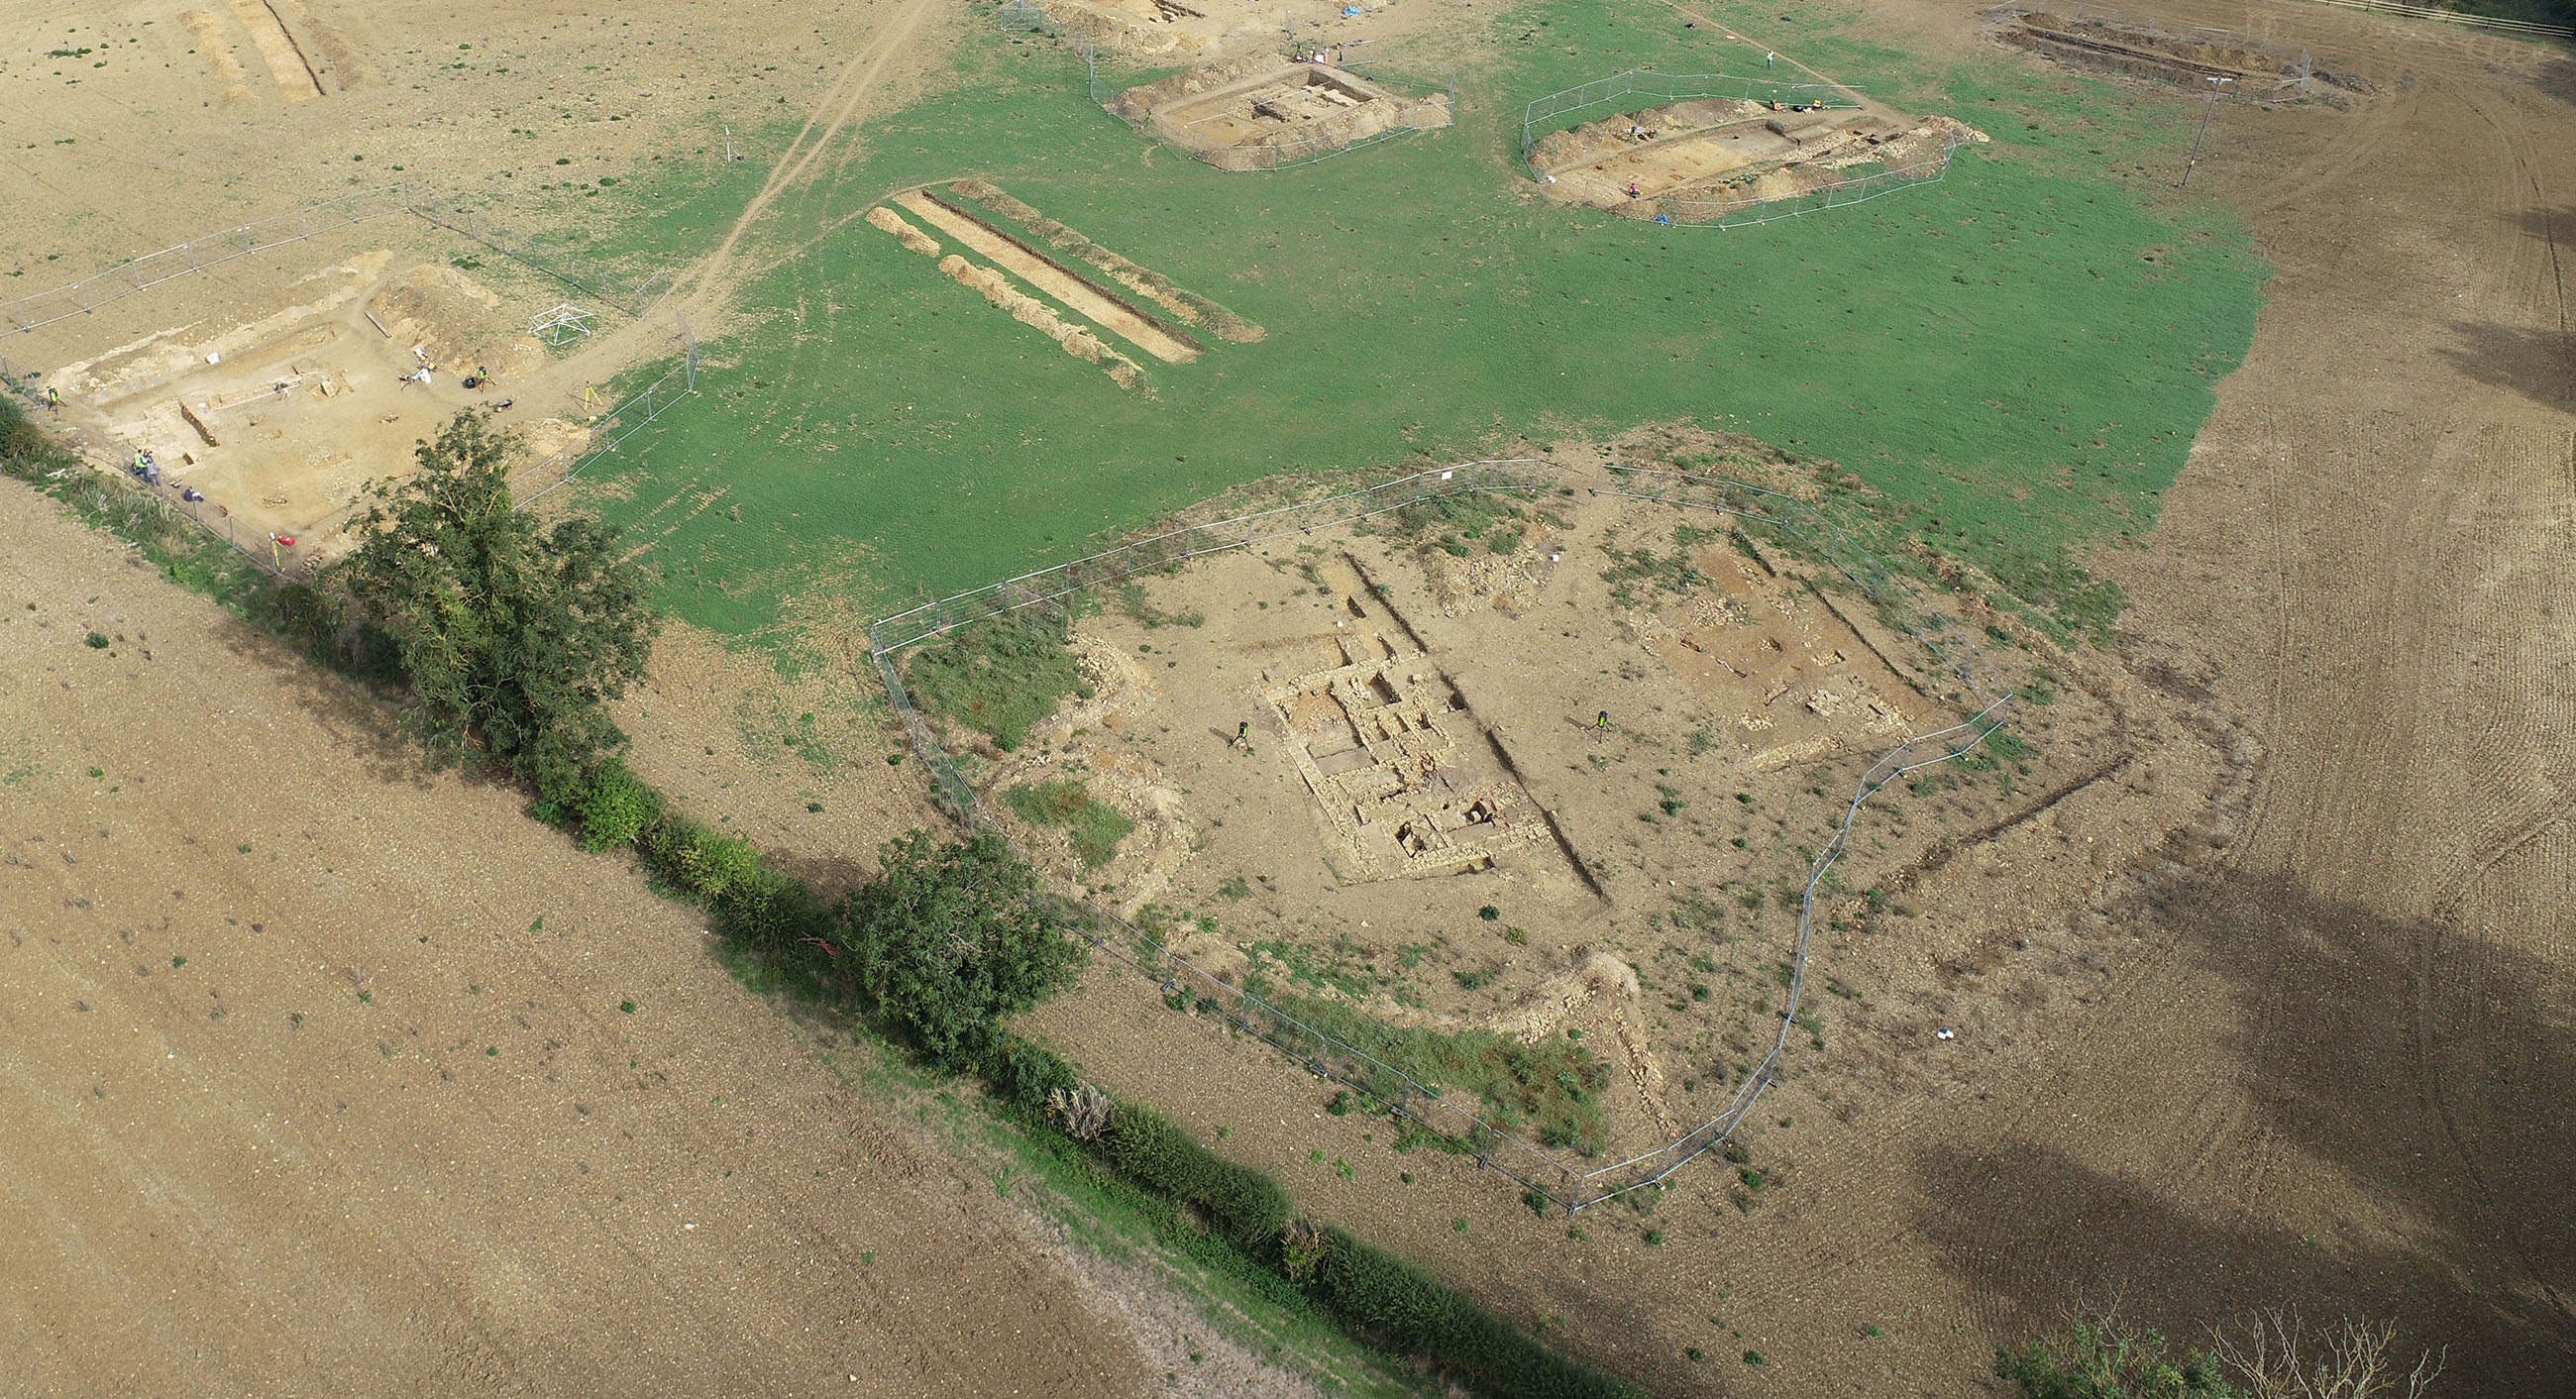 Aerial view of an excavation with trenches containing foundations of stone walls.